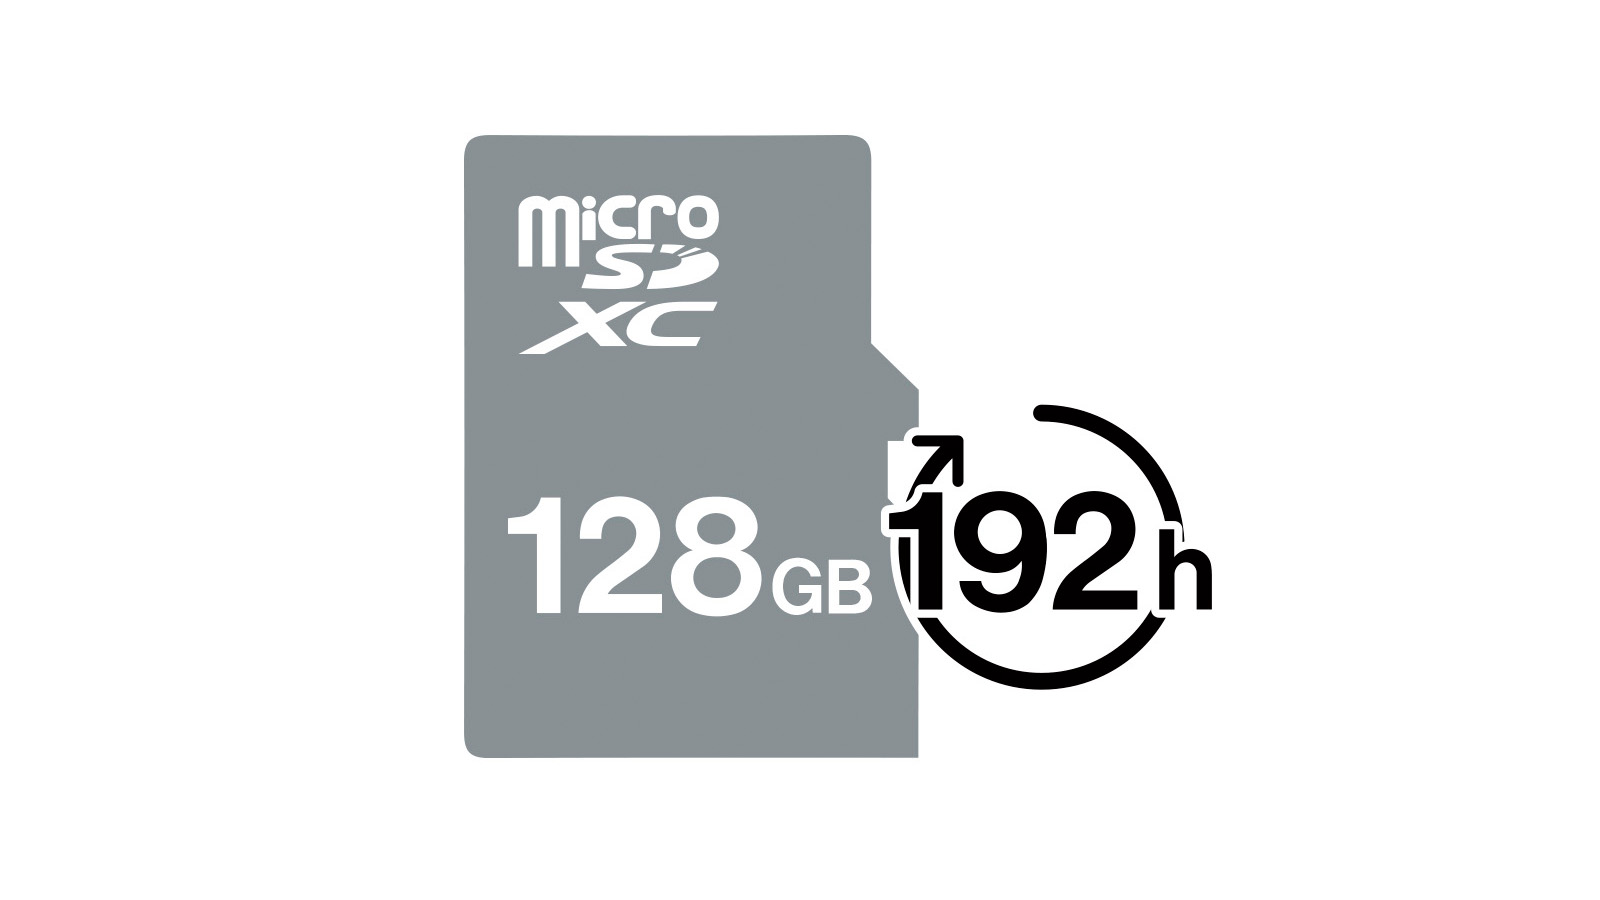 192 Hours. This is how long you can record CD-quality sound with one single microSDXC card.